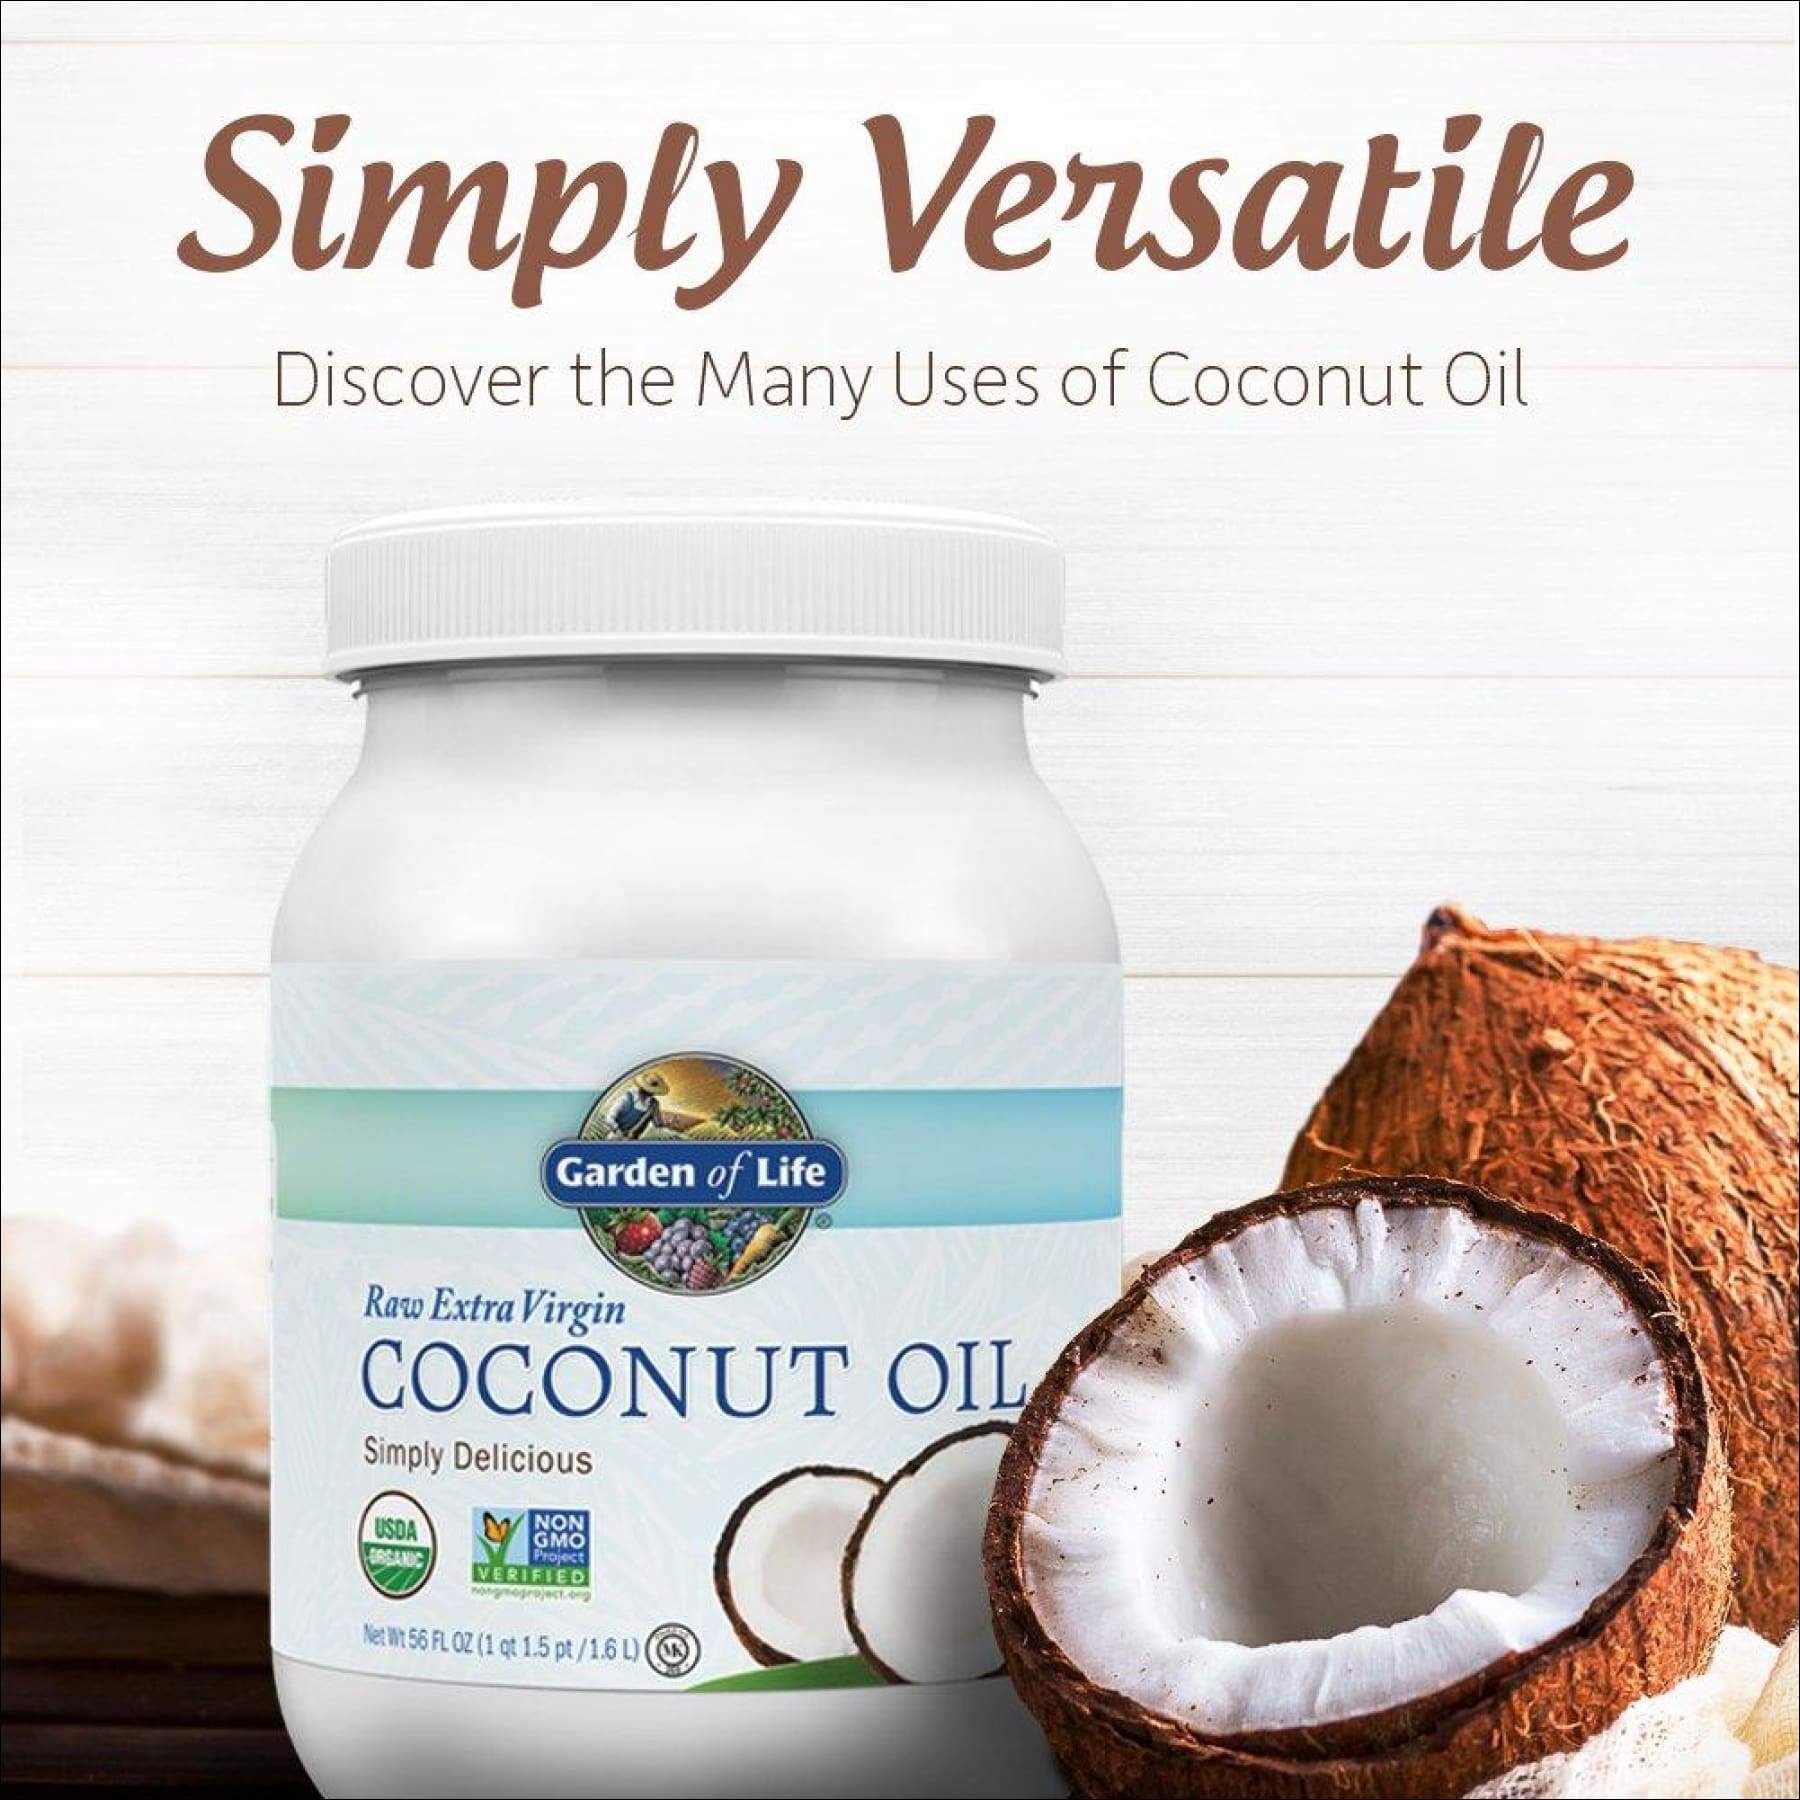 Garden of Life Coconut Oil for Hair, Skin, Cooking - Raw Extra Virgin Organic Coconut Oil, 27 Servings - Pure Unrefined Cold Pressed Oil with MCTs for Body Care or Baking, Aceite de Coco Organico - image 3 of 7